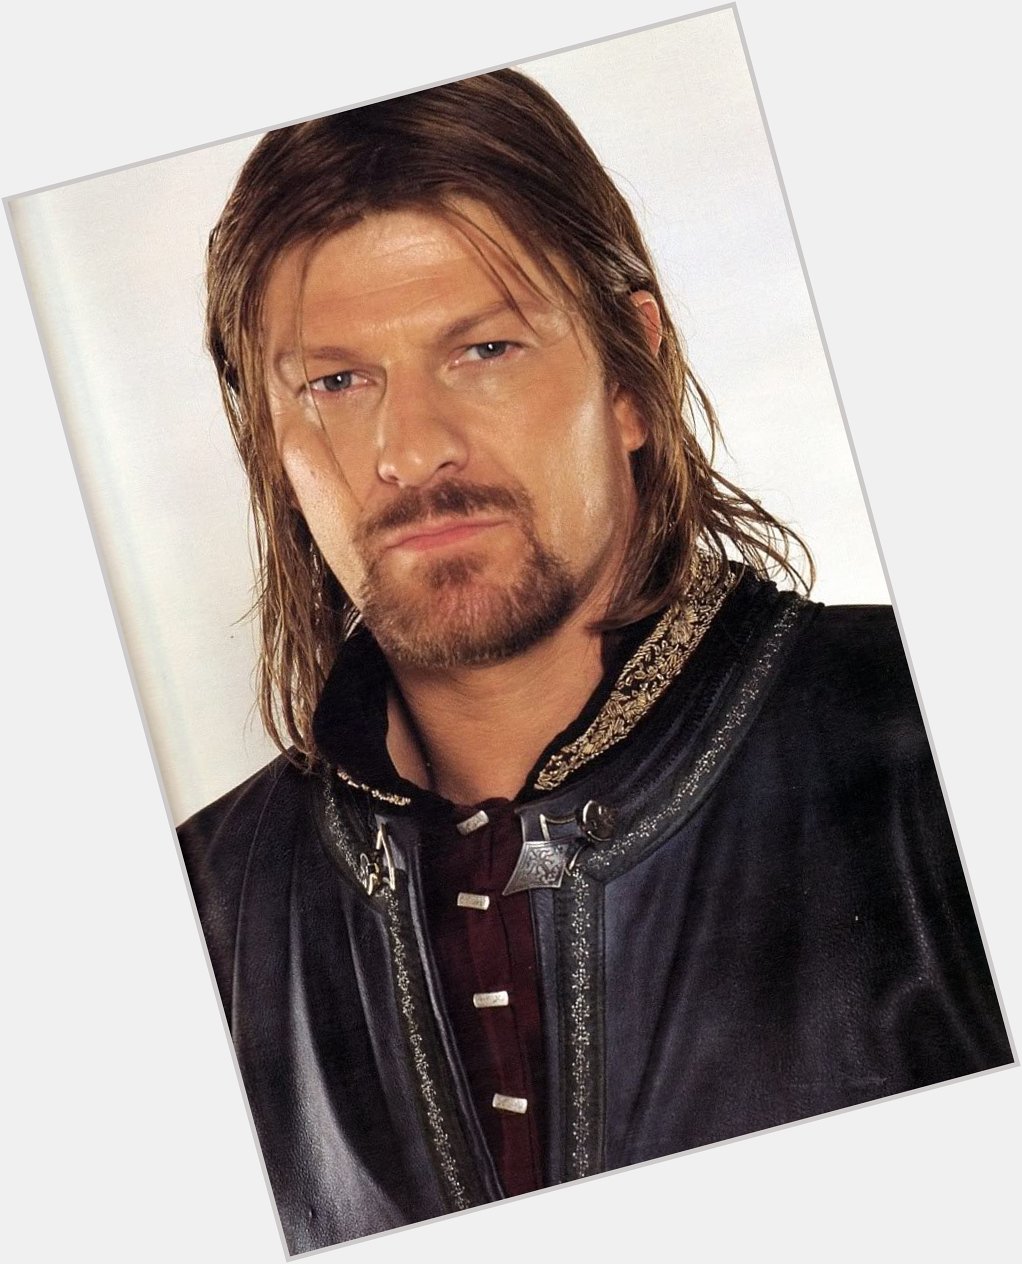 Happy birthday to me but more so to Boromir aka Sean Bean who is way hotter than Aragorn don t @ me 